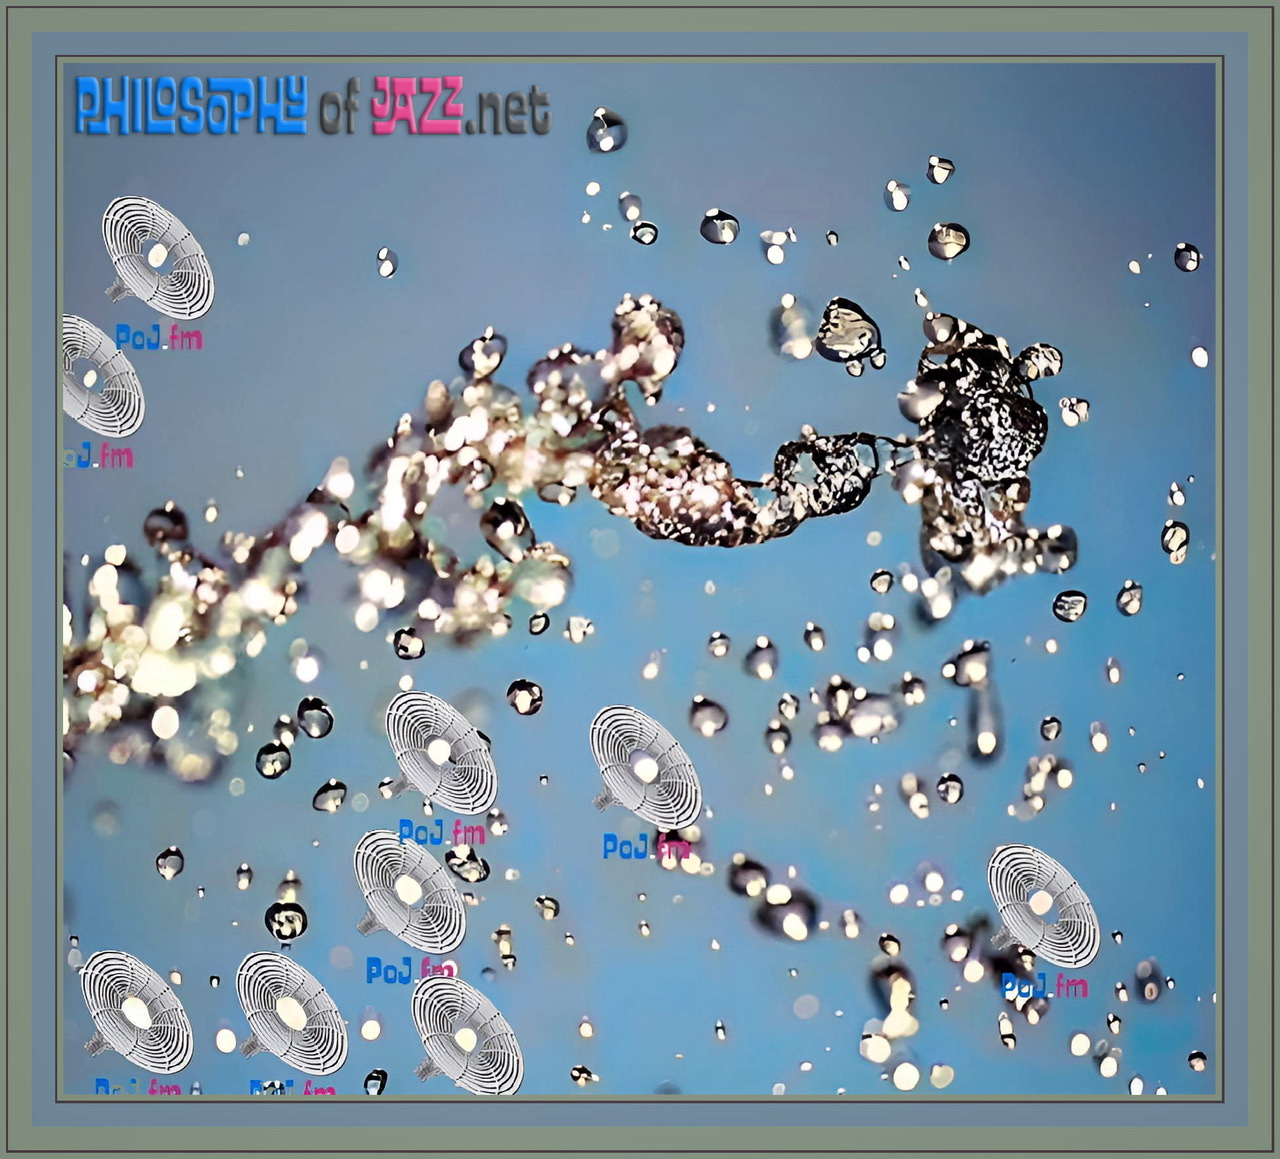 An enhanced and colorized photograph of water droplets diagonally projected across space from lower left to upper right string in center of screen with PoJ.fm logos being droplets and flowing with the water projections.